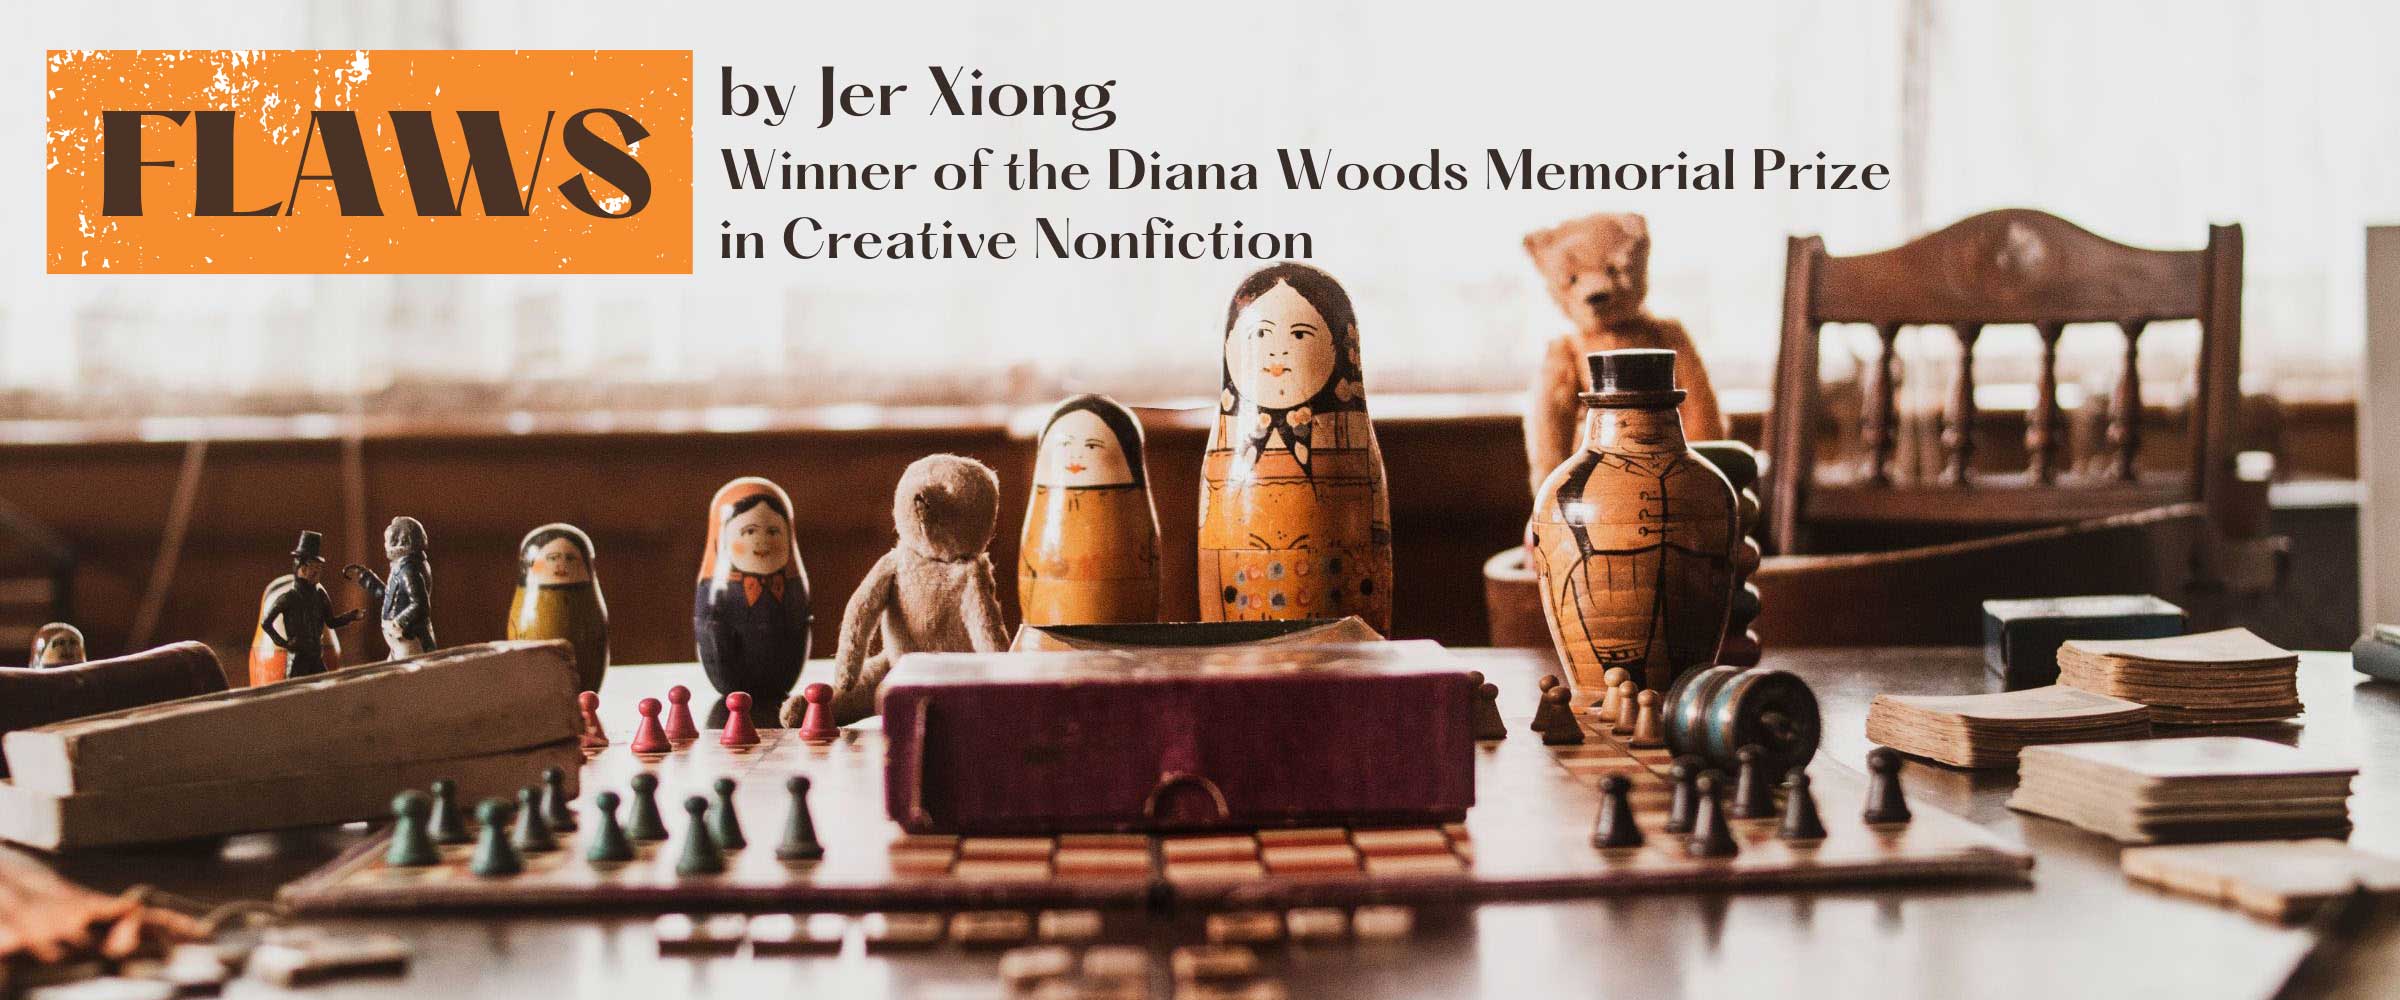 Flaws by Jer Xiong, Winner of the Diana Woods Memorial Prize in Creative Nonfiction